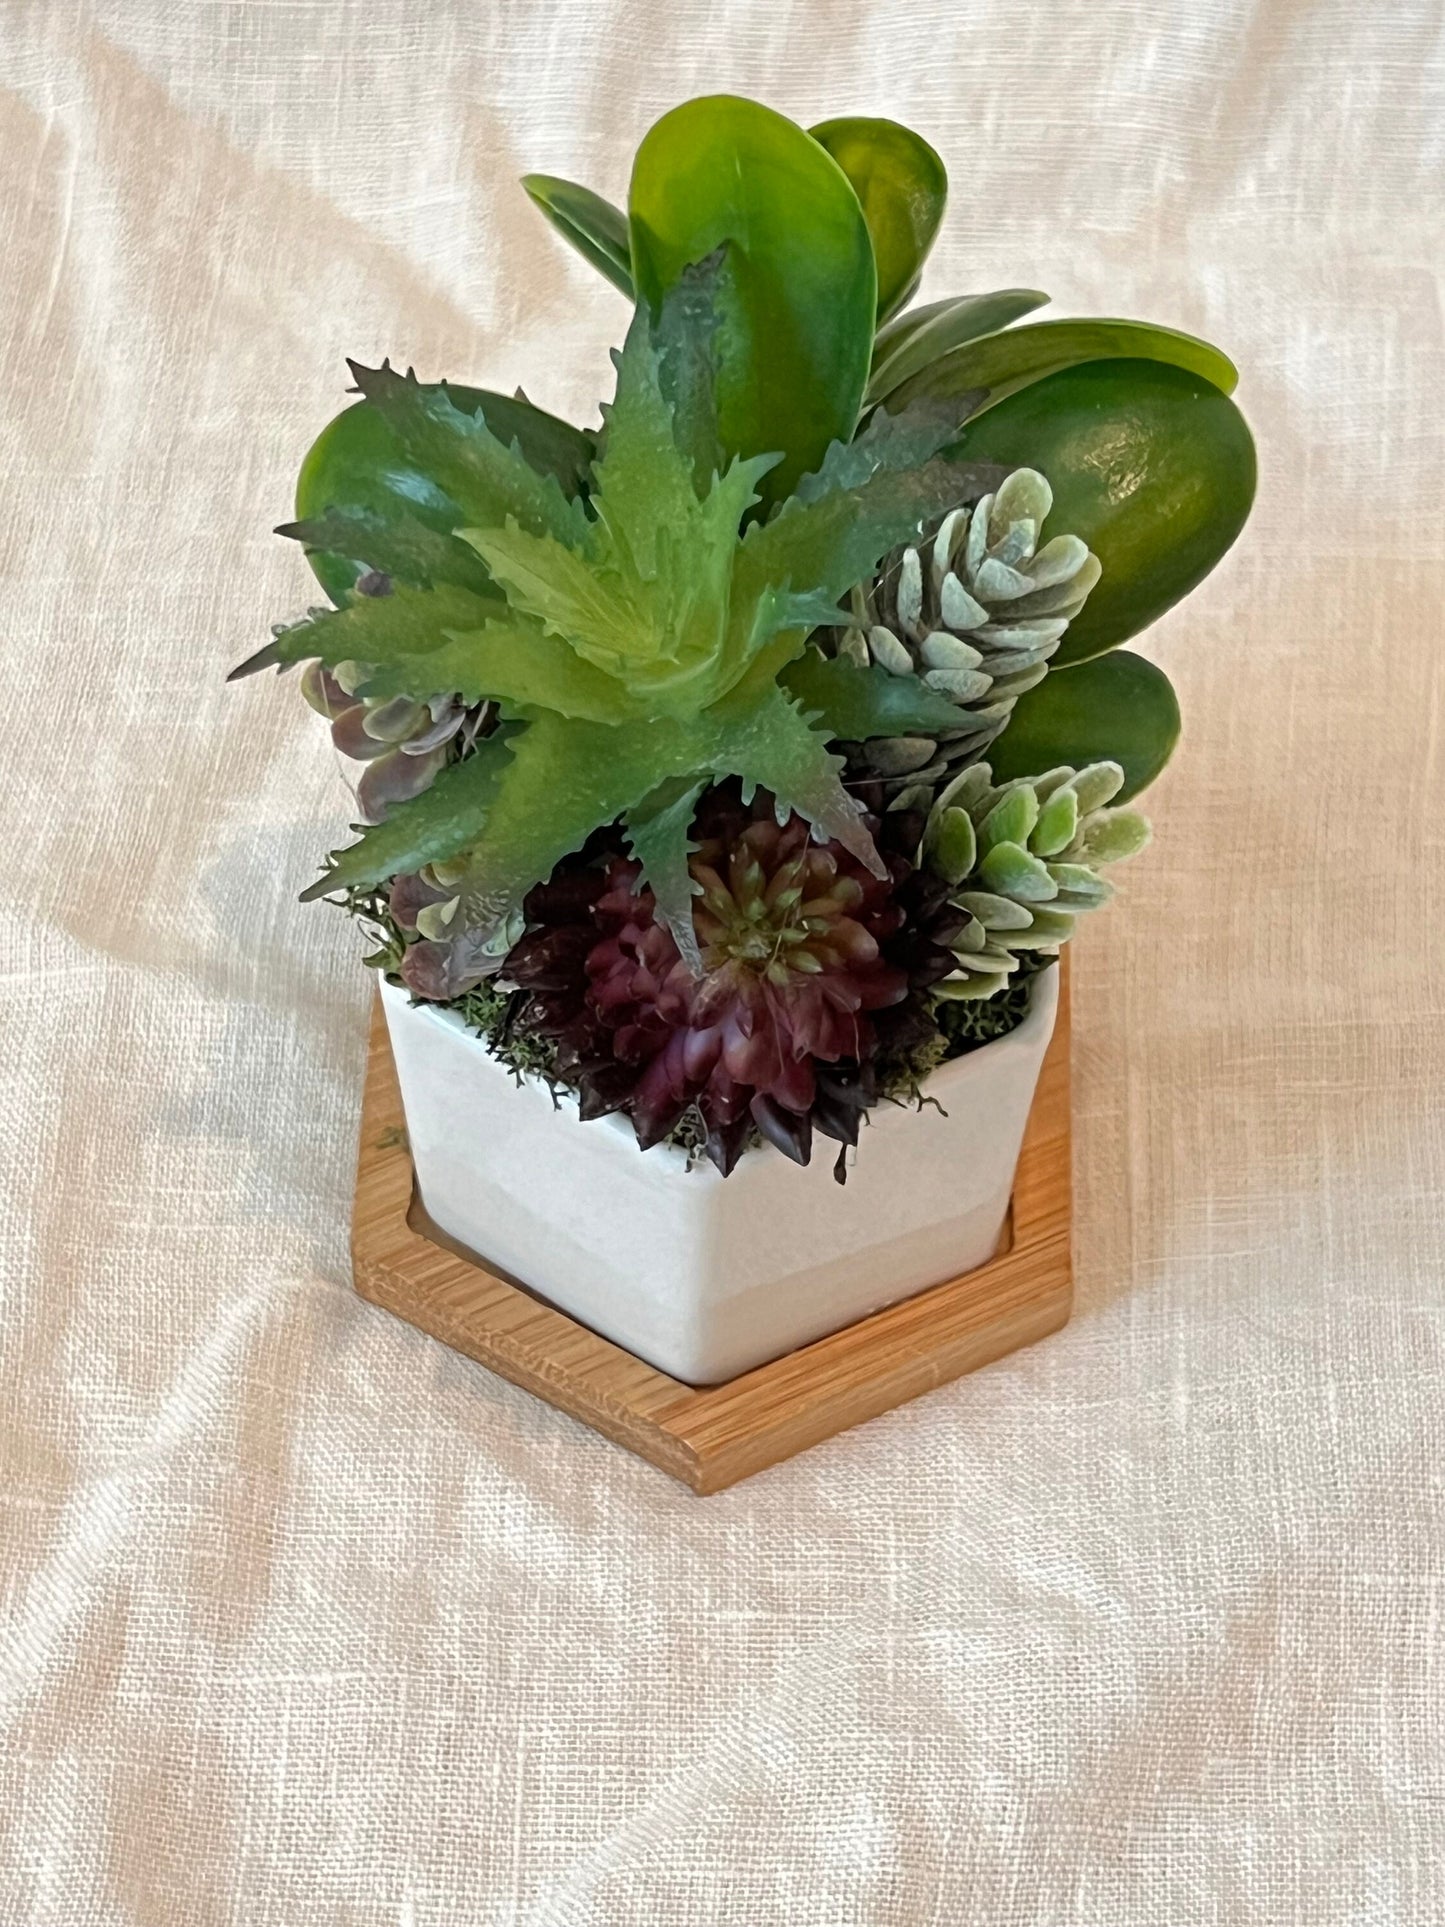 Happy Birthday Gift Box l Custom Birthday Gift l Succulent Gift l Candle Gift l Faux Succulent Gift l Birthday Gift